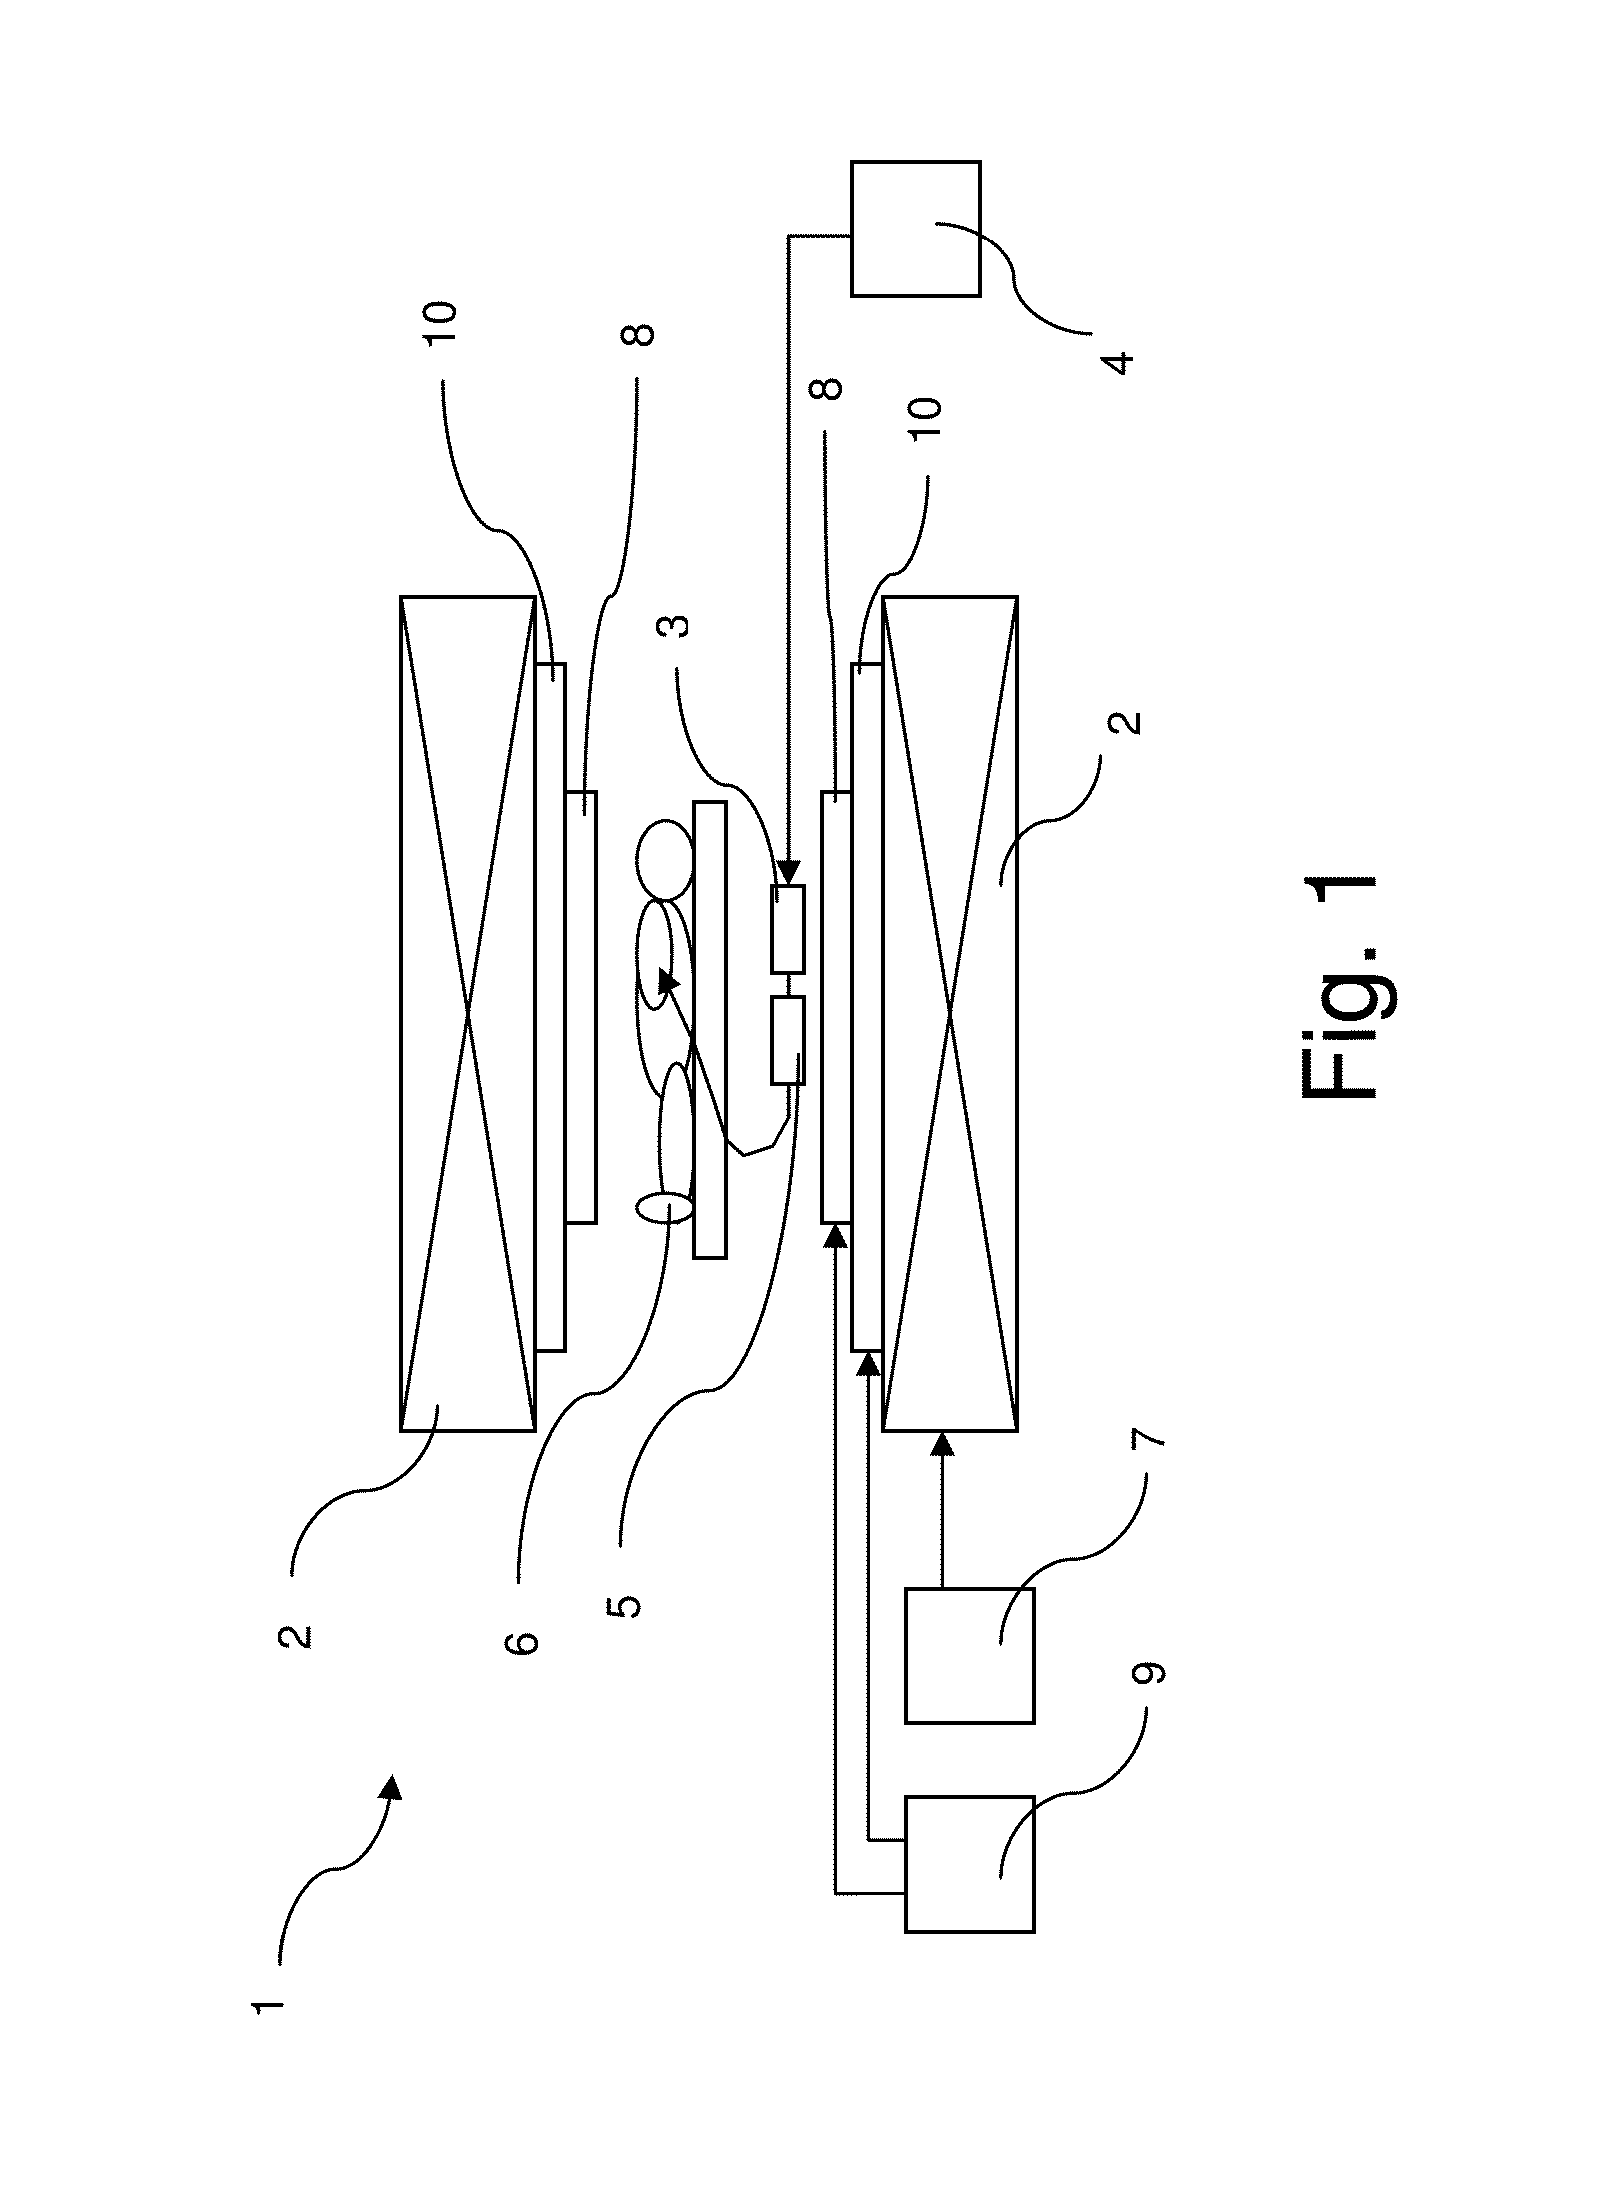 Field cycling method for magnetic resonance